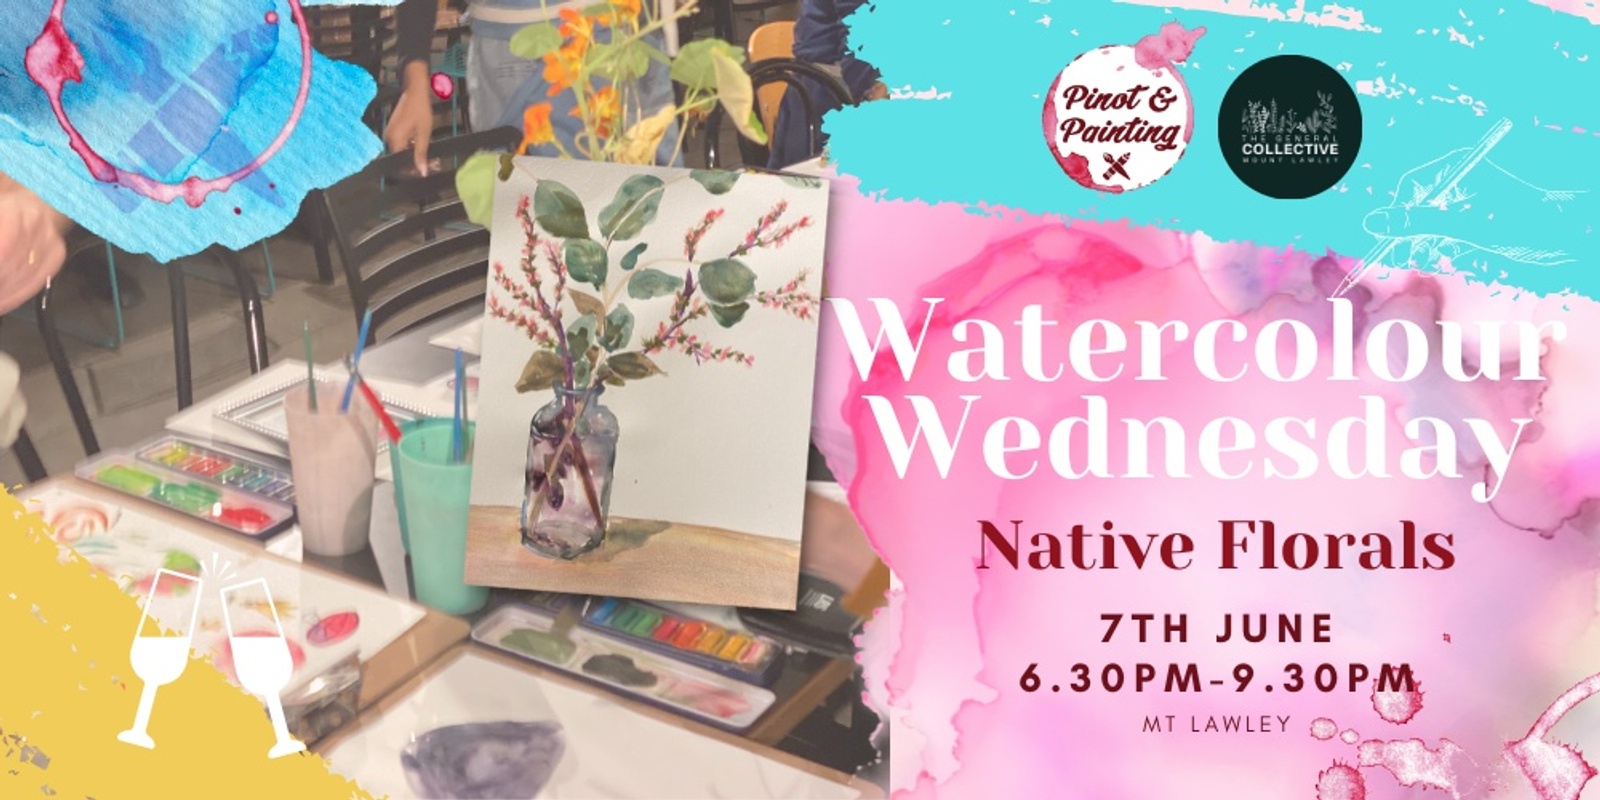 Native Florals - Watercolour Wednesday @ The General Collective